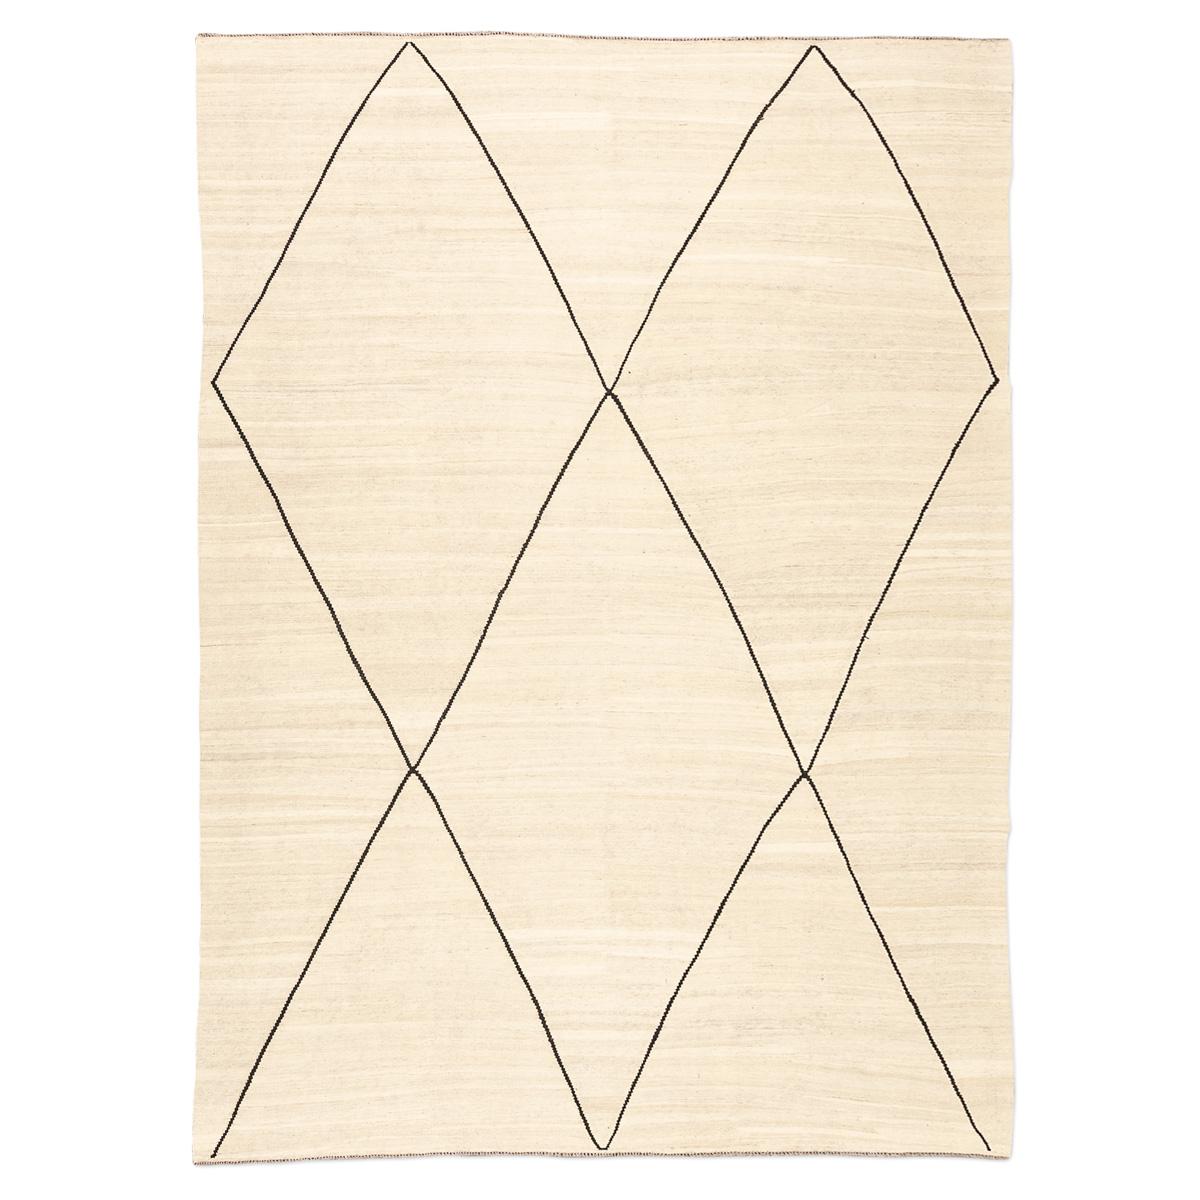 Contemporary Kilim, Rhombus Berber Design with Beige and Black Colors